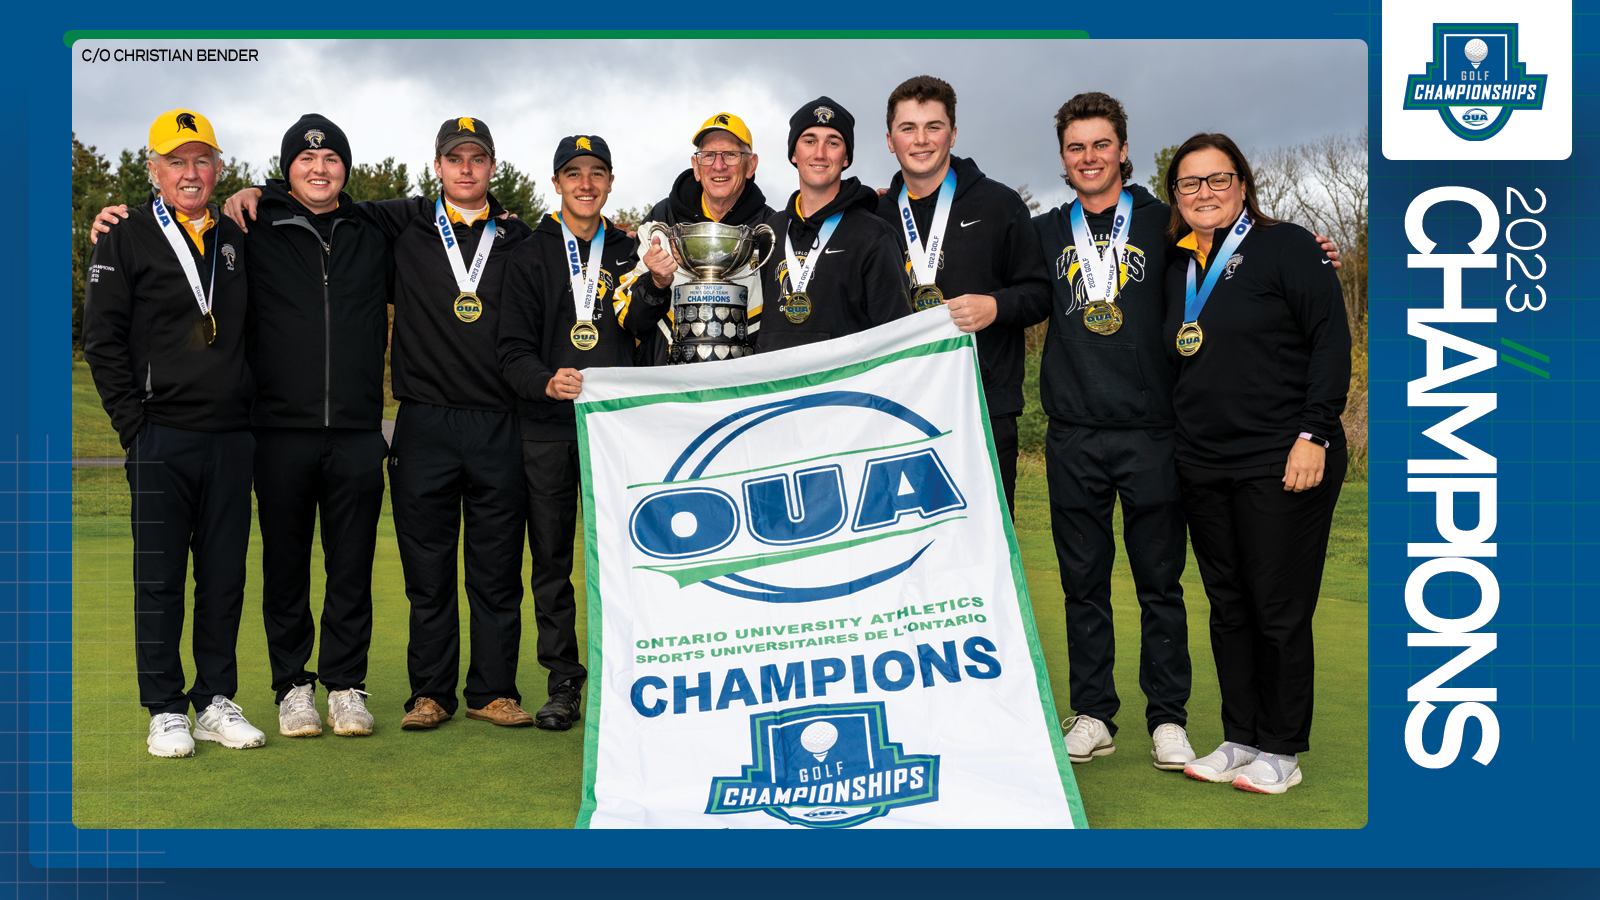 Predominantly blue graphic covered mostly by 2023 OUA Men's Golf Championship banner photo, with the corresponding championship logo and white text reading '2023 Champions' on the right side